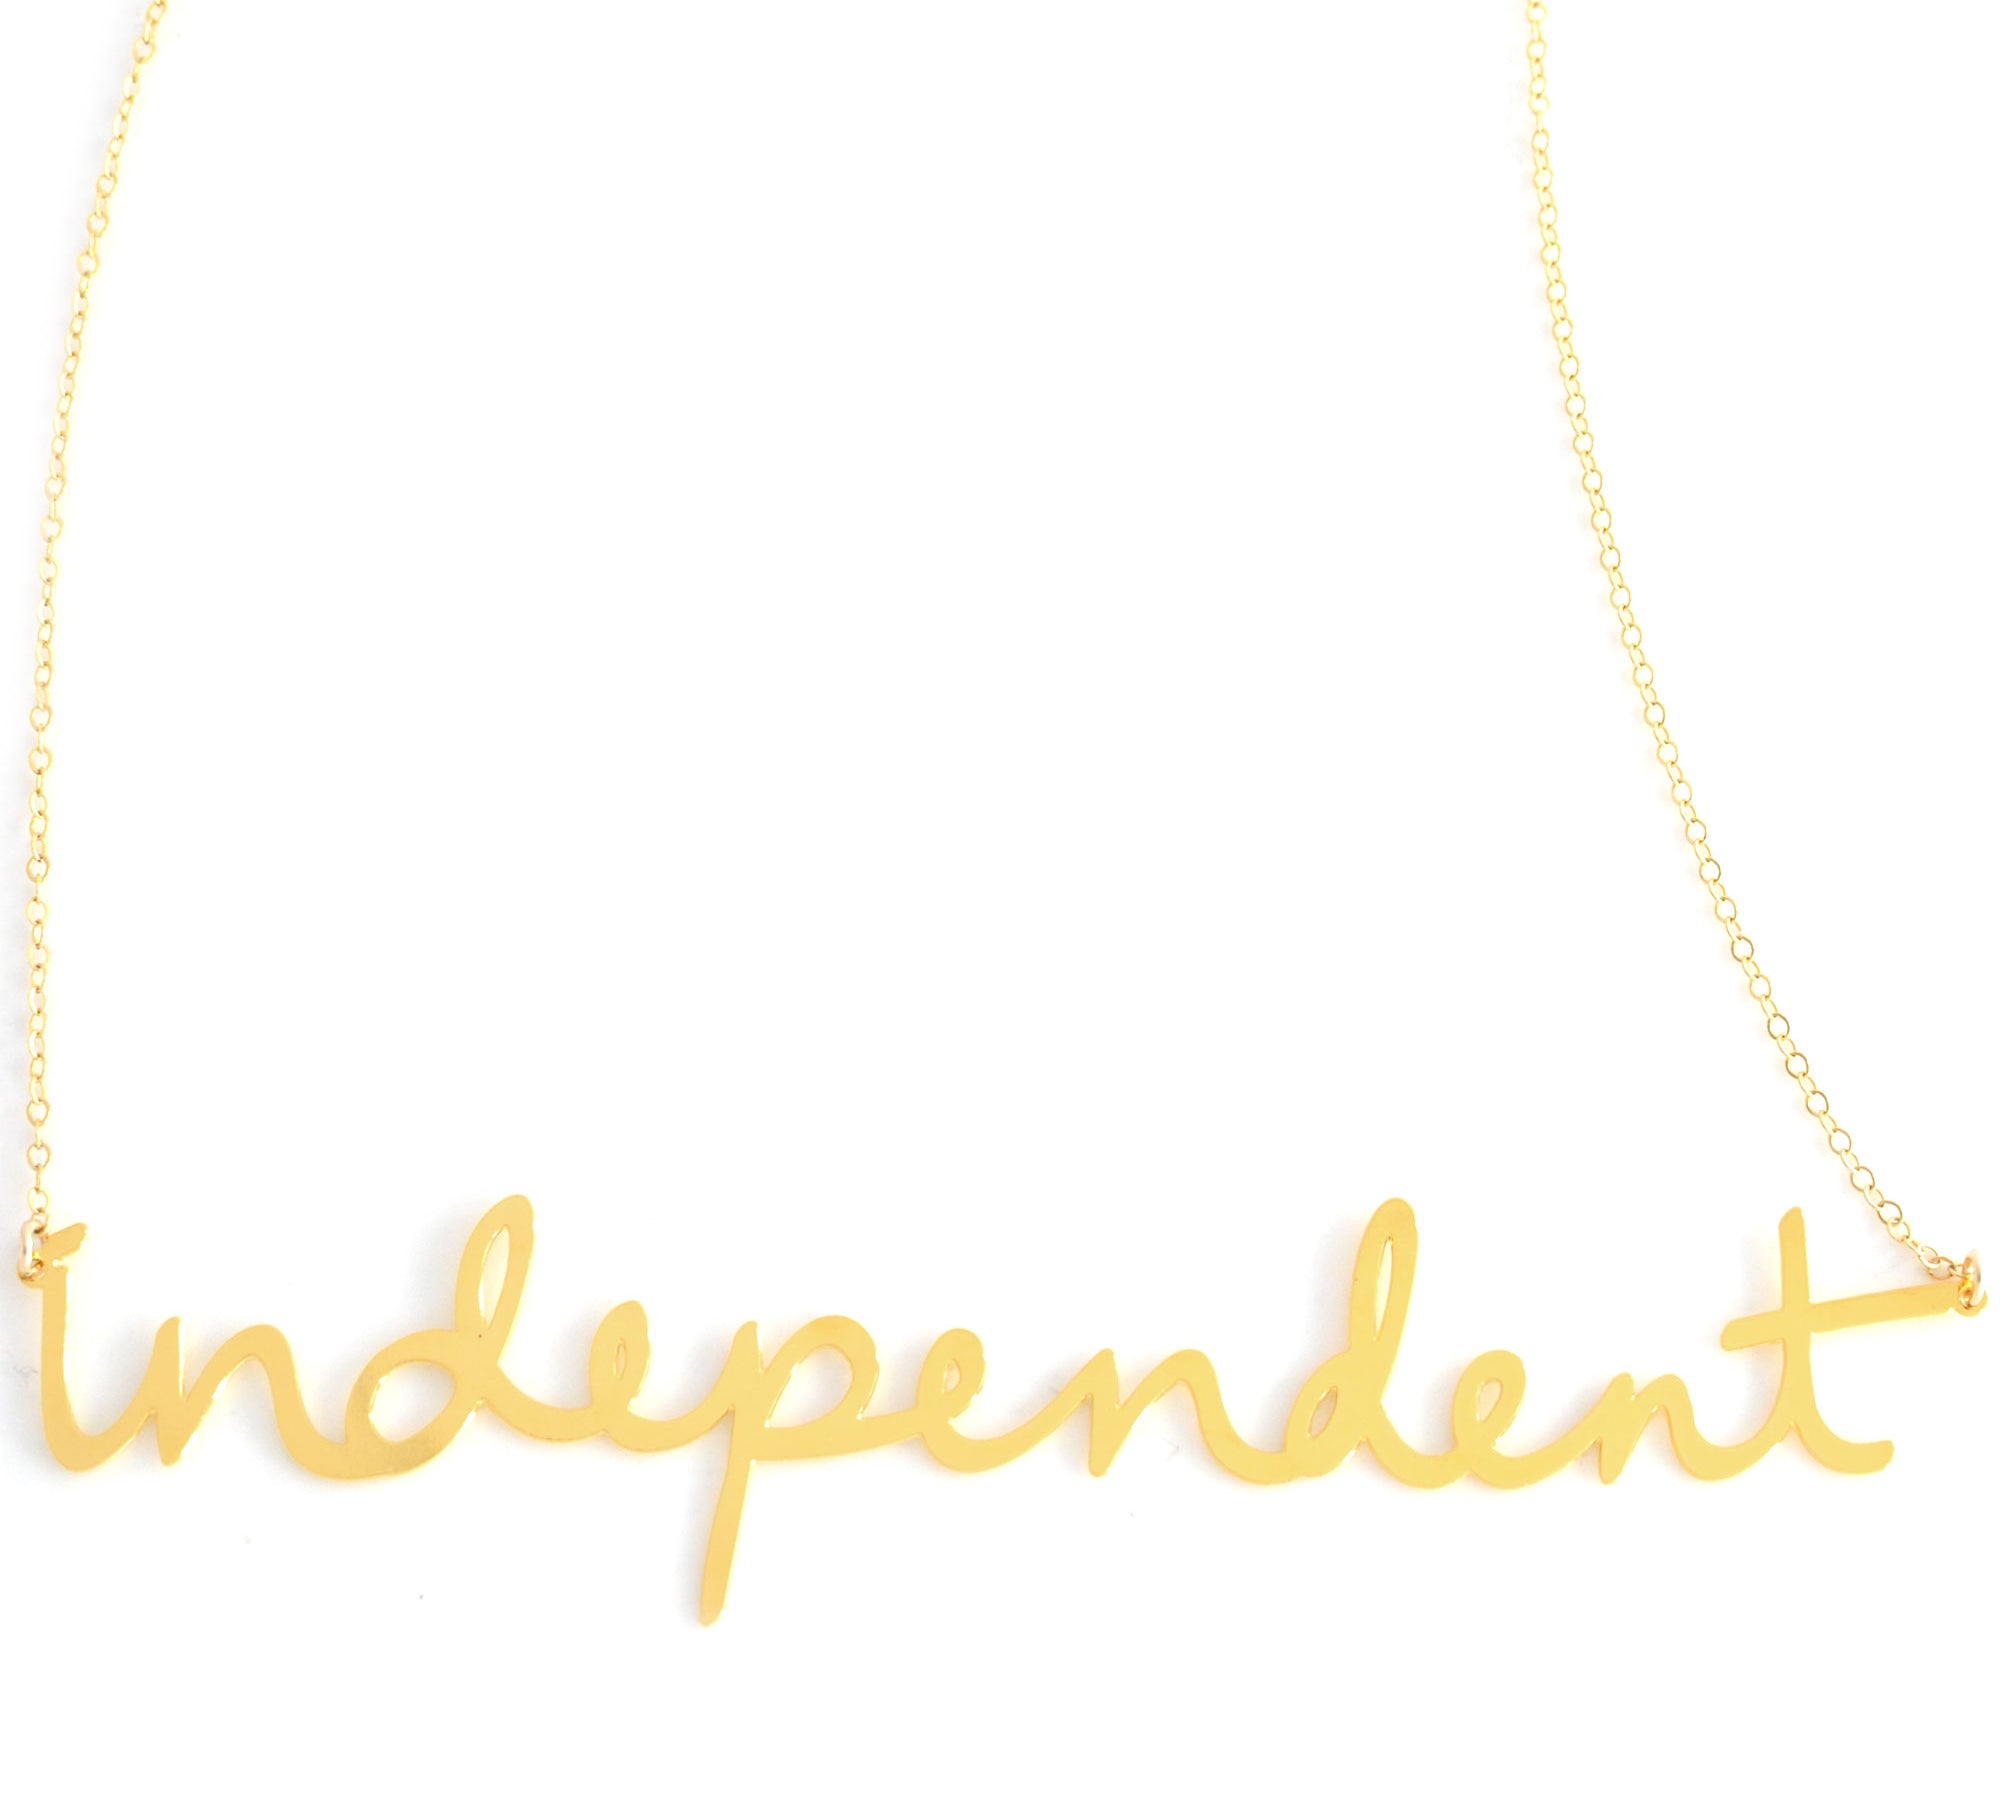 Independent Necklace - High Quality, Affordable, Hand Written, Empowering, Self Love, Mantra Word Necklace - Available in Gold and Silver - Small and Large Sizes - Made in USA - Brevity Jewelry